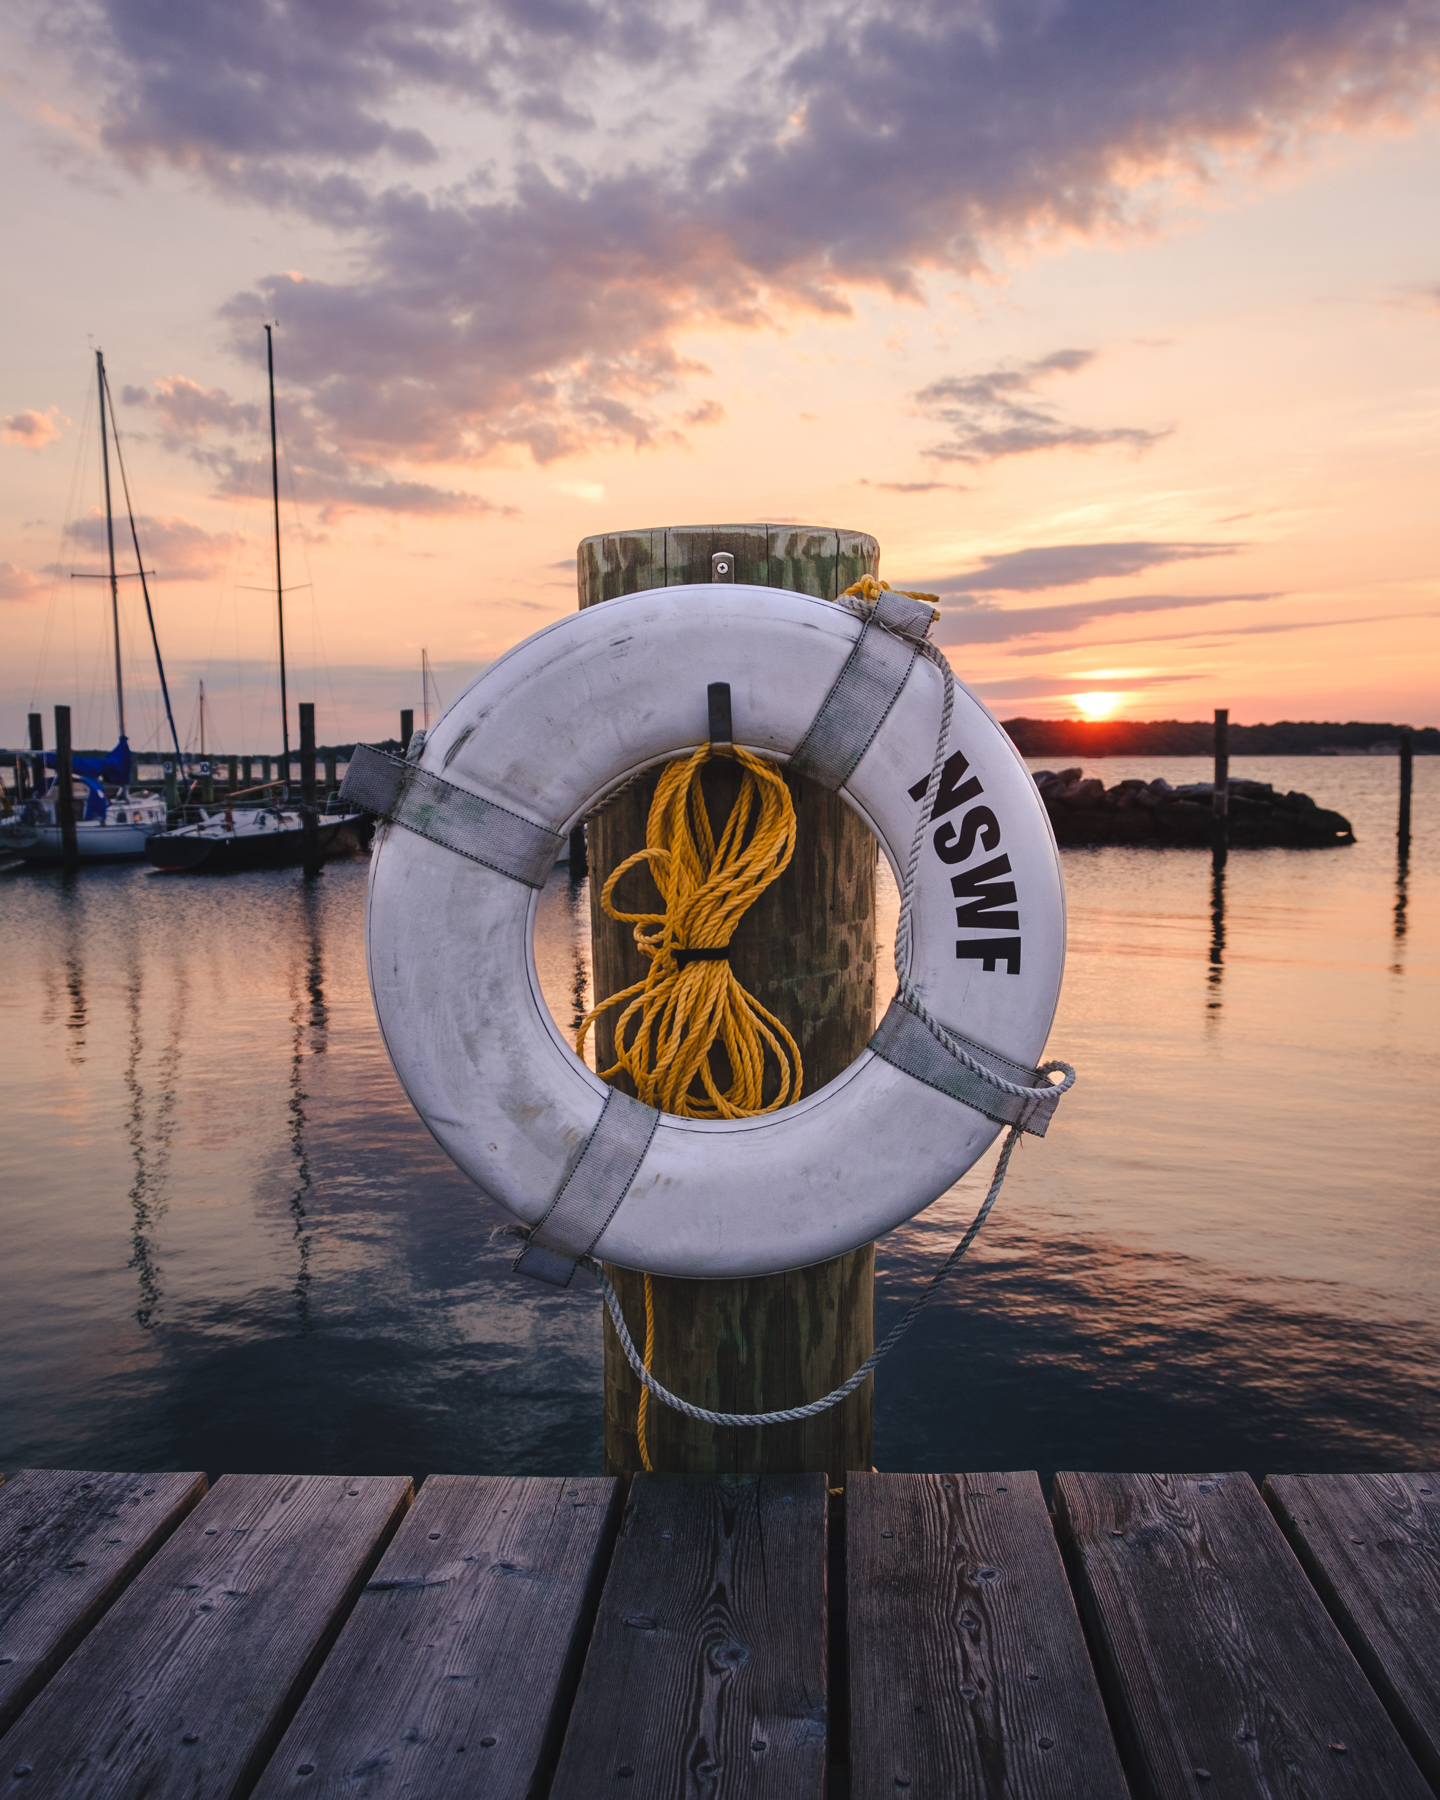 A life preserver attached to a wooden post on a dock at sunrise. The background features moored sailboats and calm water reflecting the colorful sky.